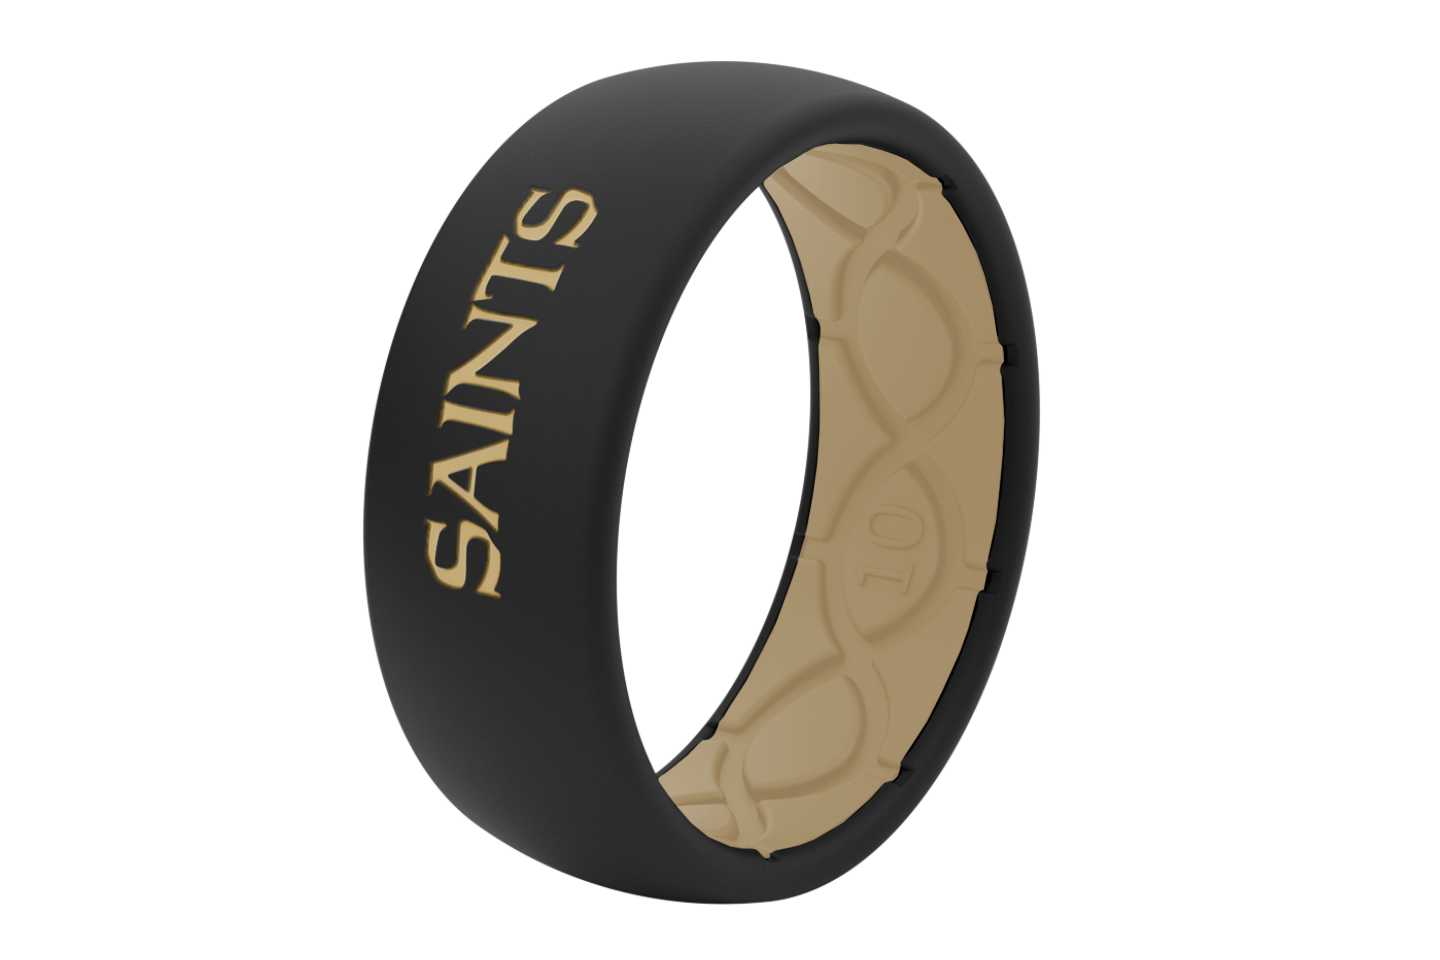 New Orleans saints ring view on its side